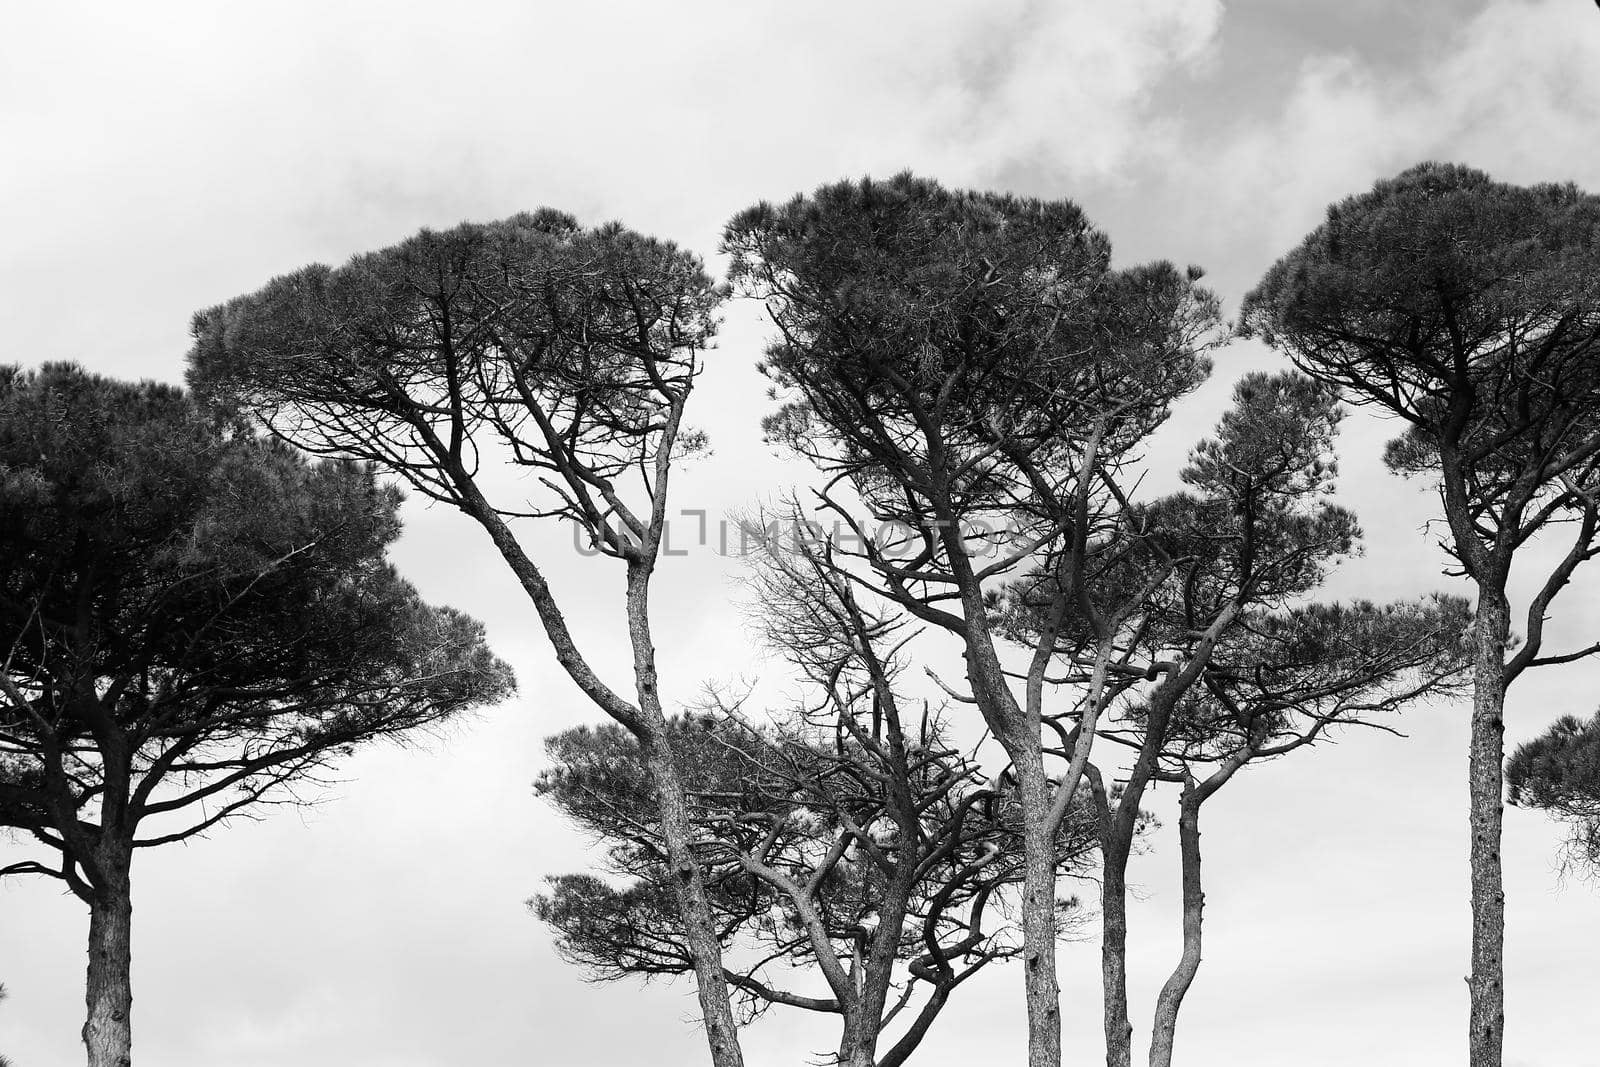 the high fronds and the majesty of the maritime pines by contas